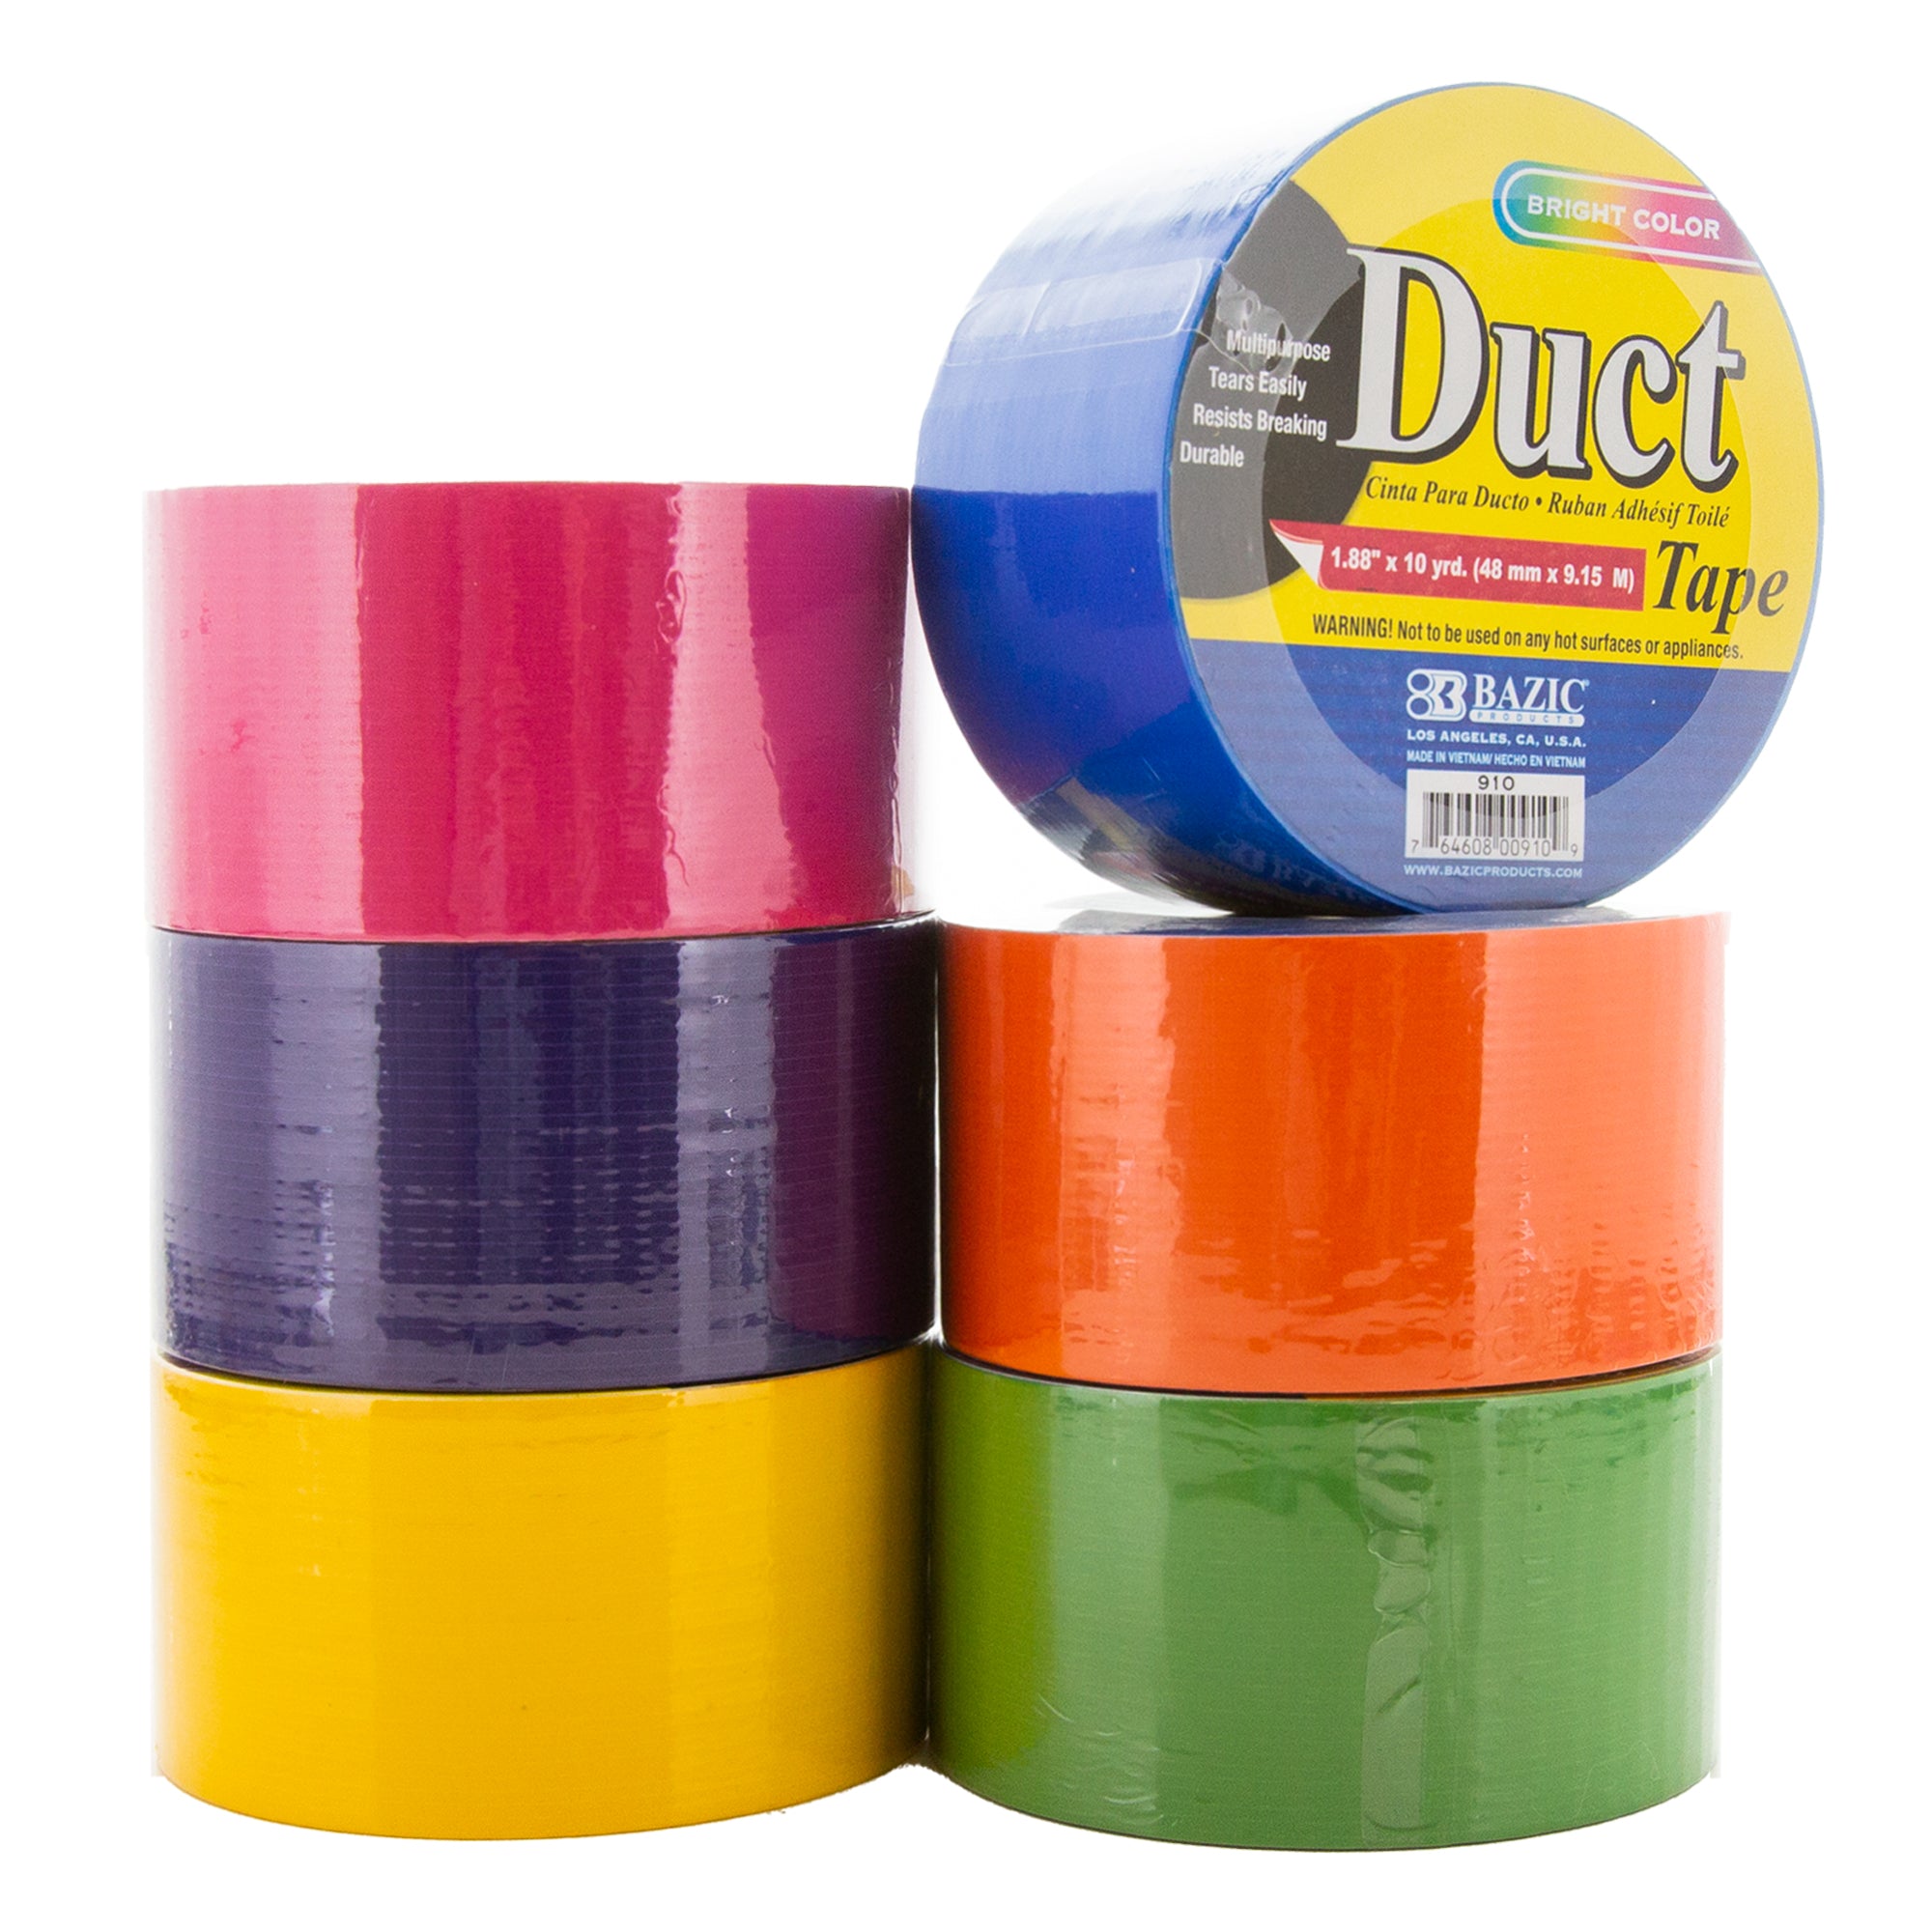 My Duct Tape Collection, So Far 